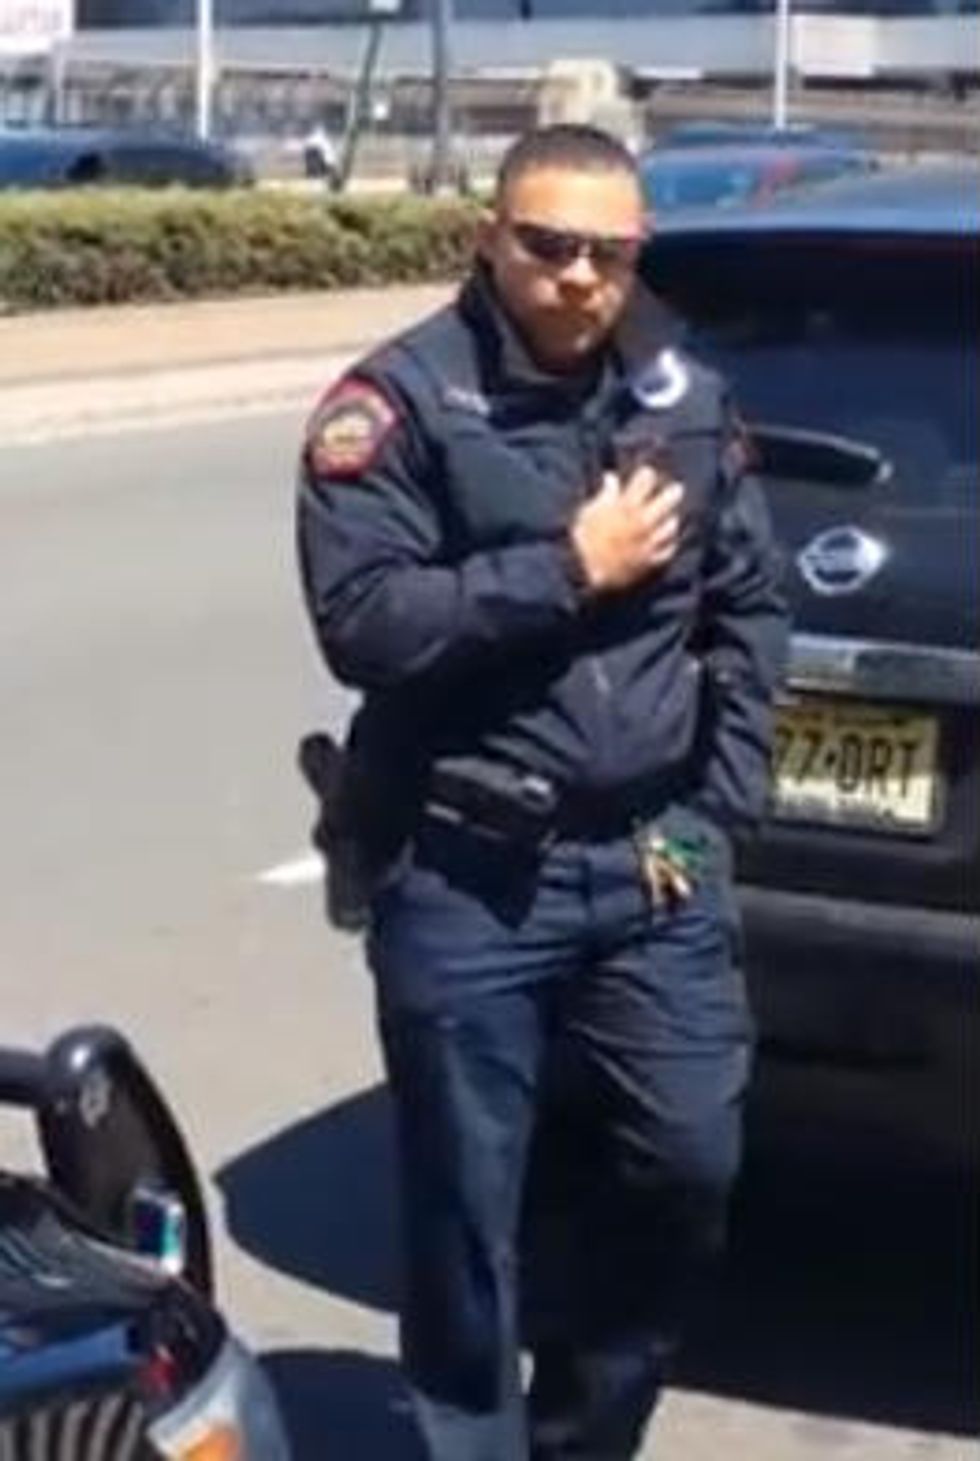 Are You Recording?': See Officer's Actions When Man Starts Recording Him During Traffic Stop